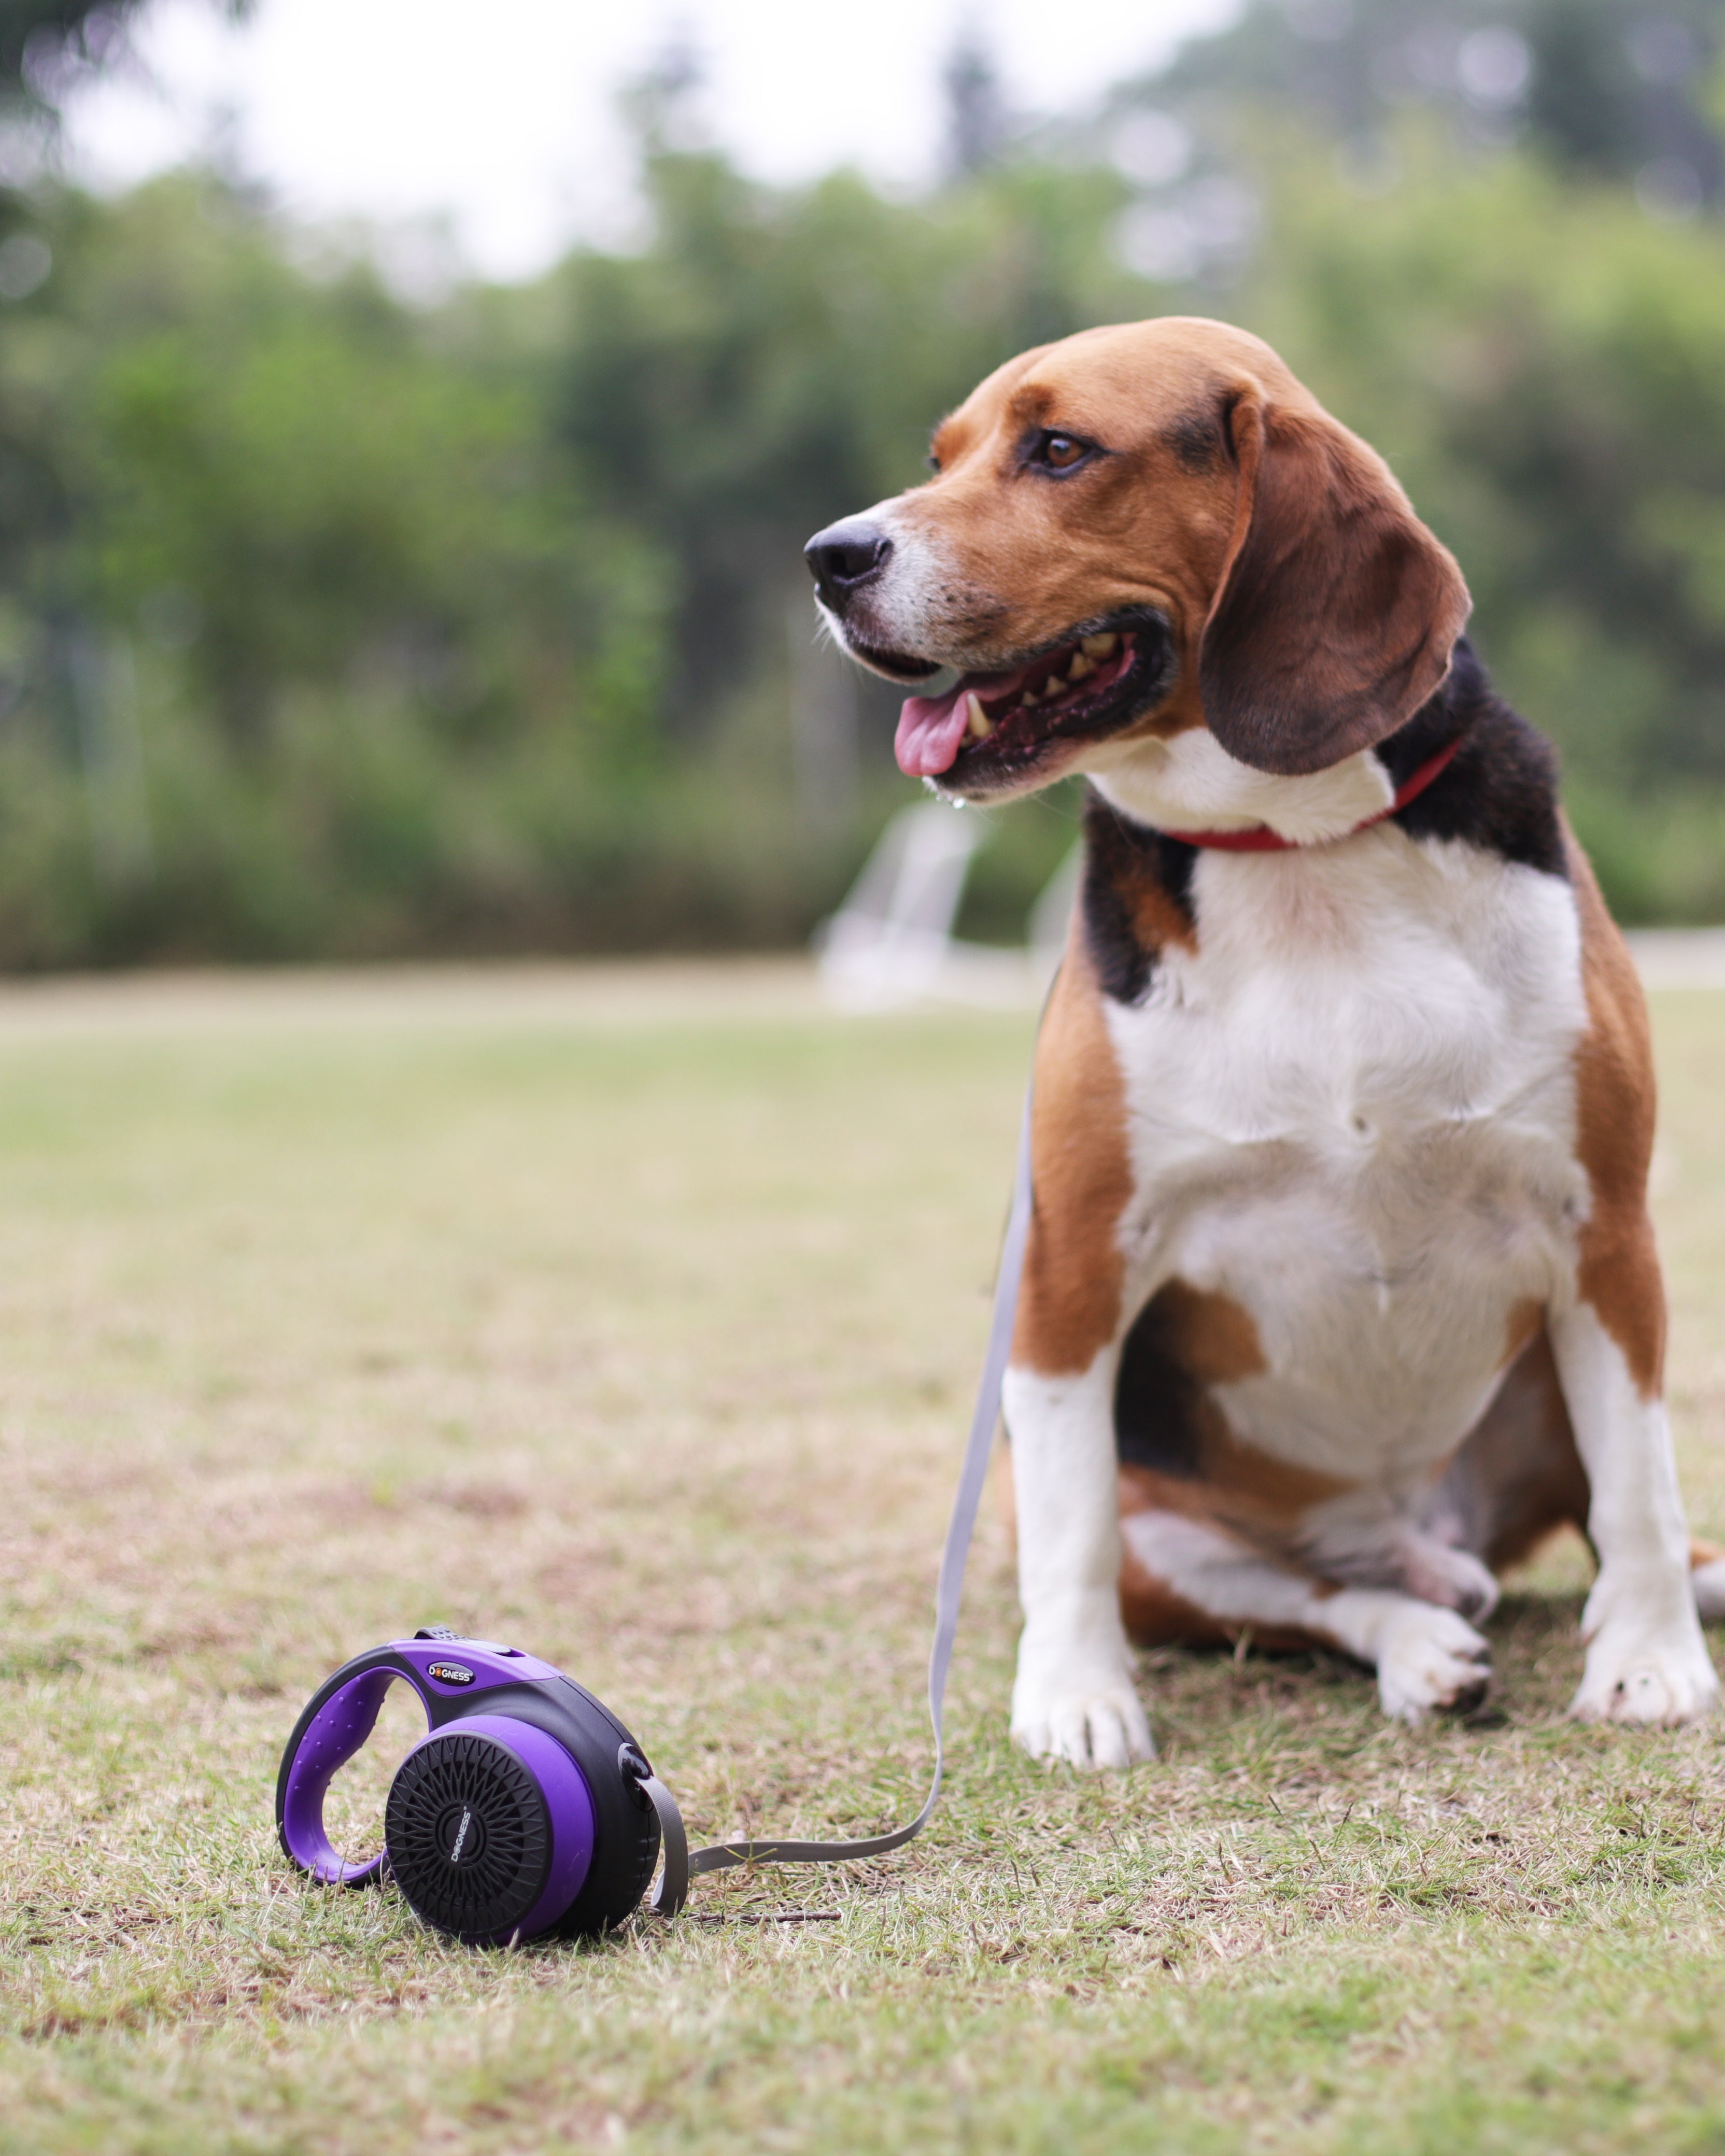 How Dogness Retractable Leashes Can Make Walking Your Dog Easier